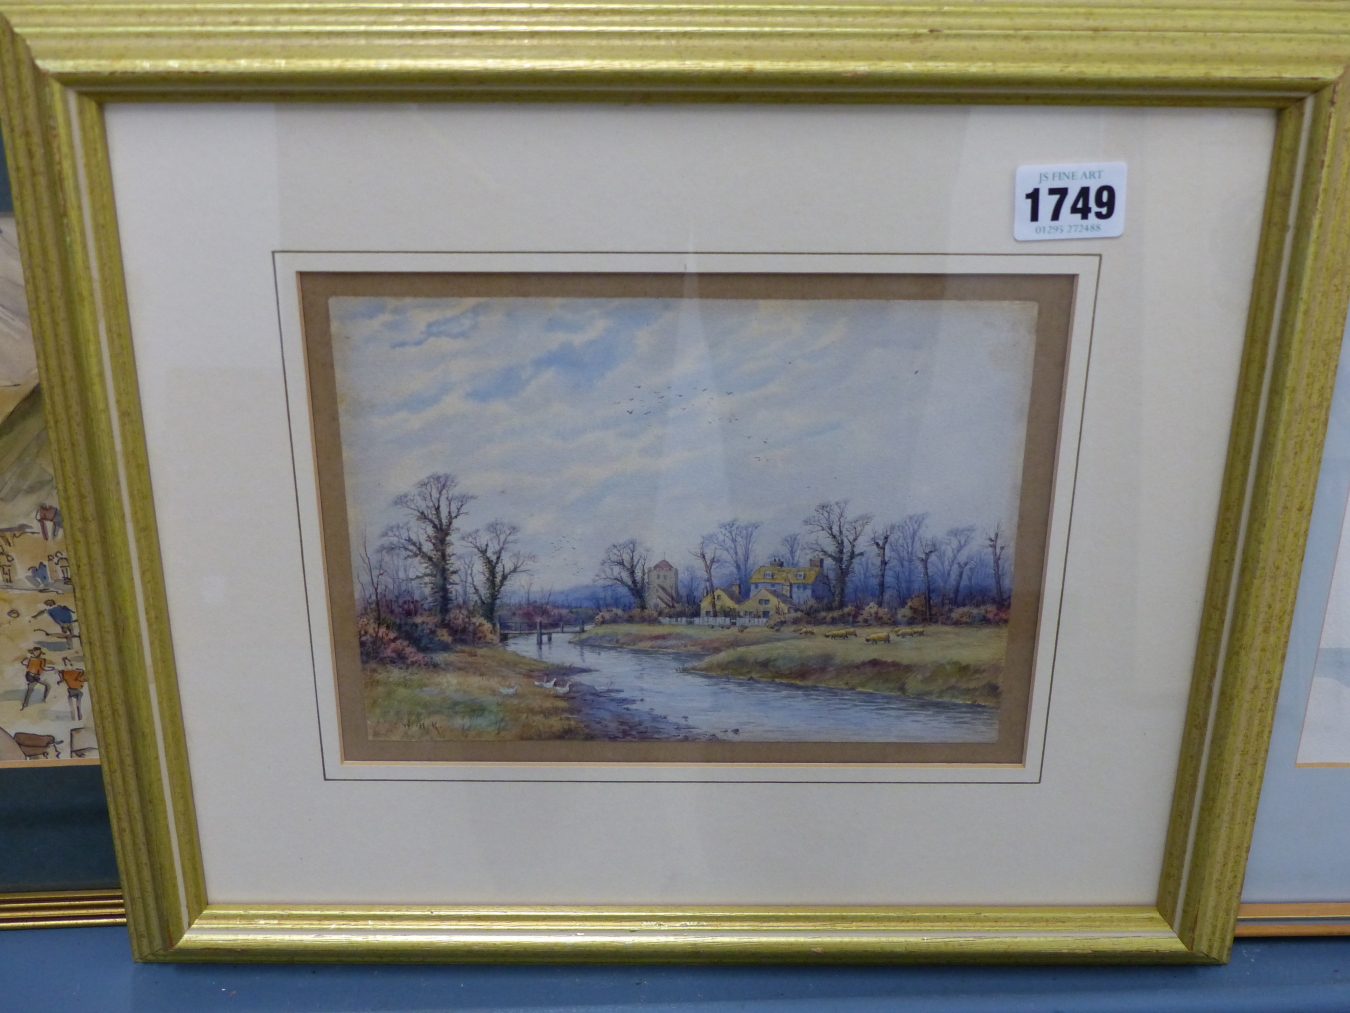 ENGLISH SCHOOL 19TH C. A PAIR OF FINELY DETAILED BUCOLIC ENGLISH RIVER SCENES, MONOGRAMMED W.H.K. - Image 3 of 5